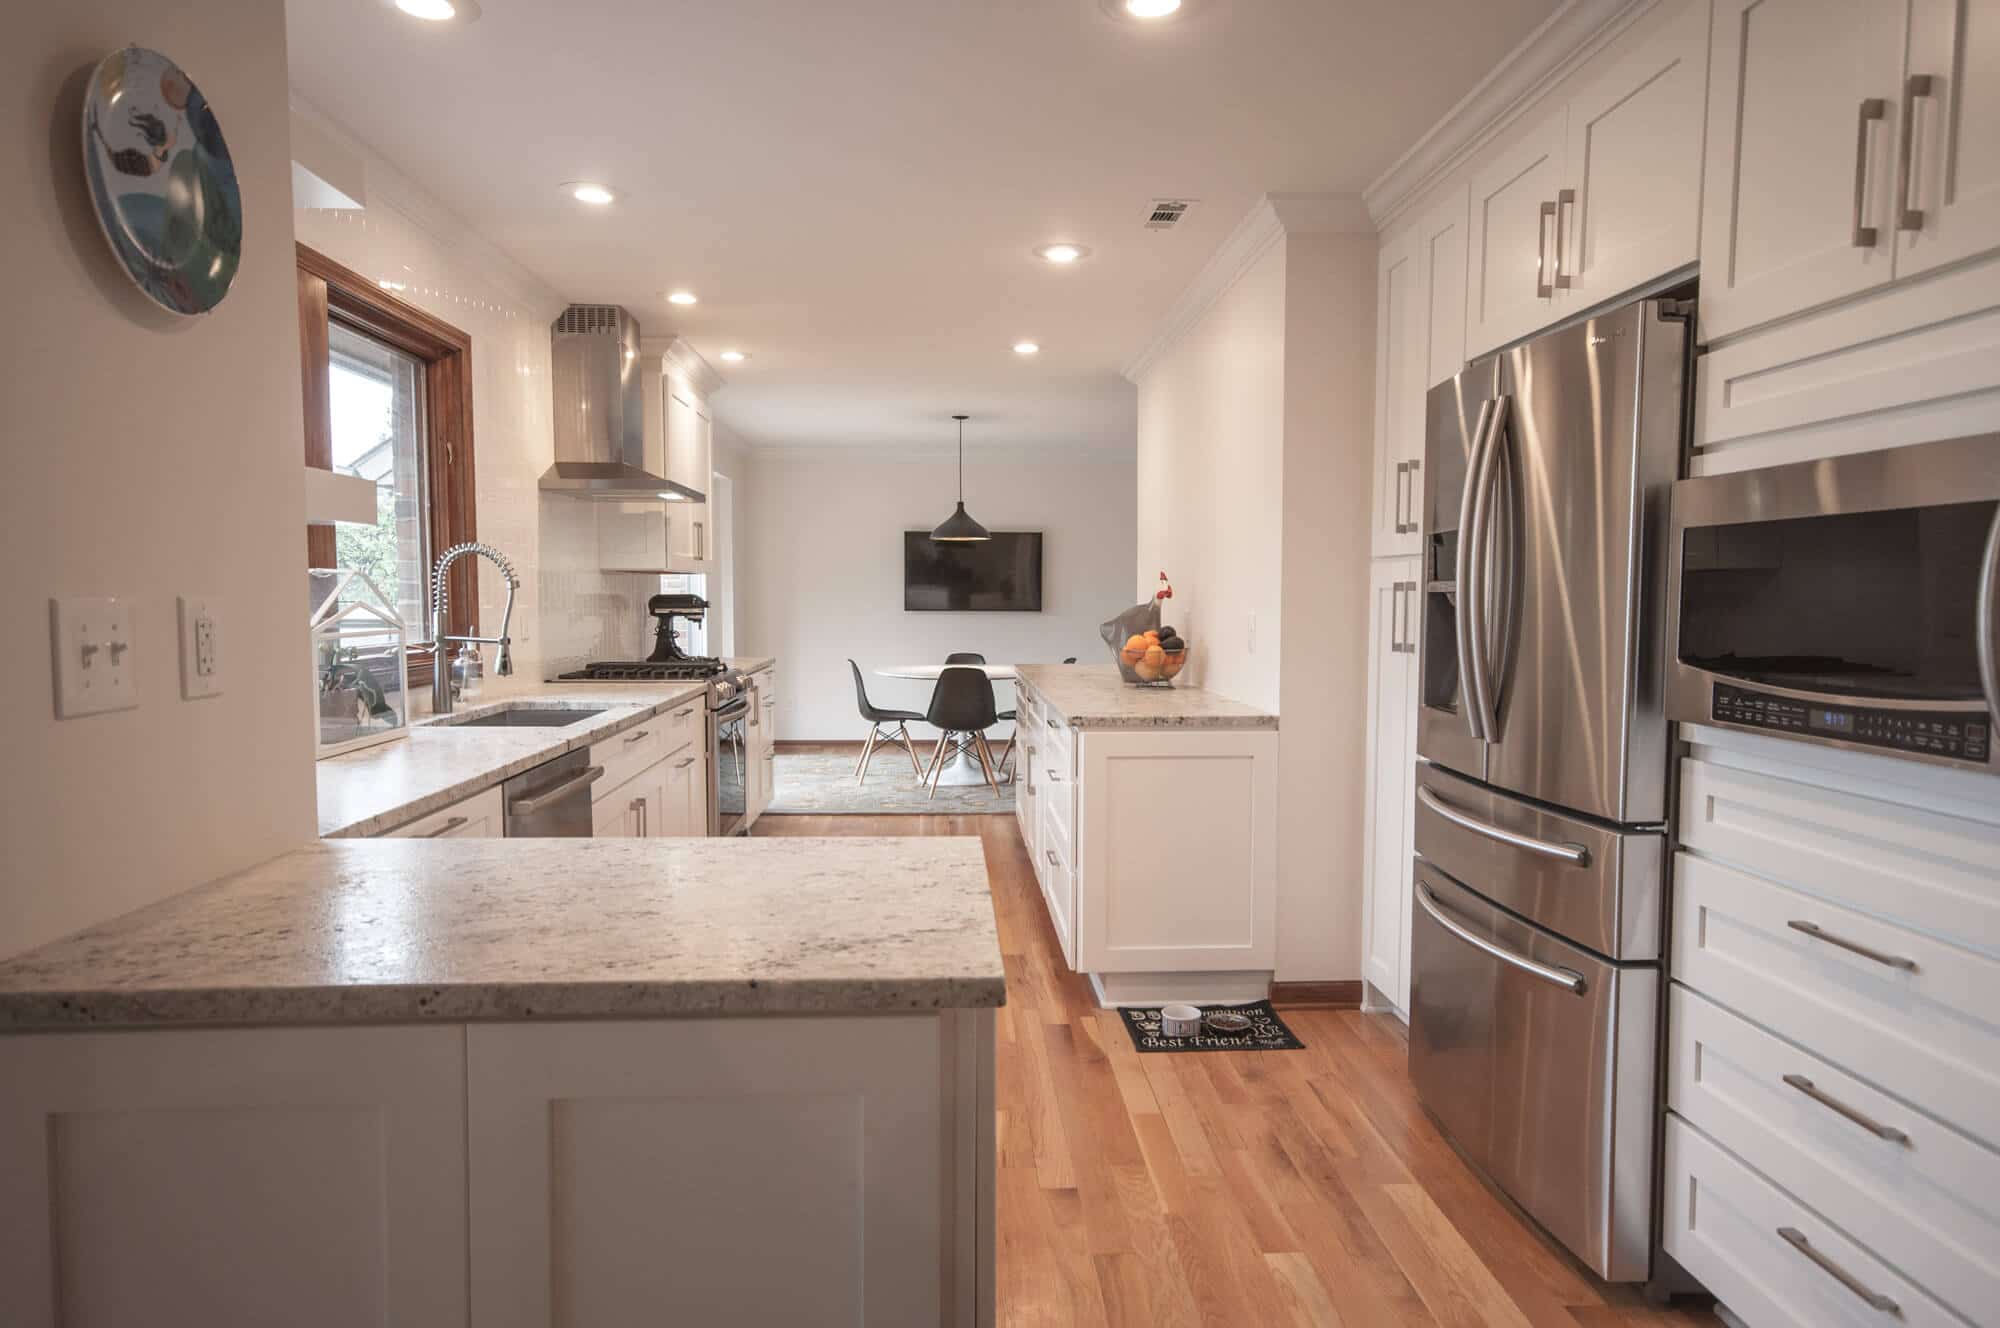 Is It Time to Remodel Your Kitchen?